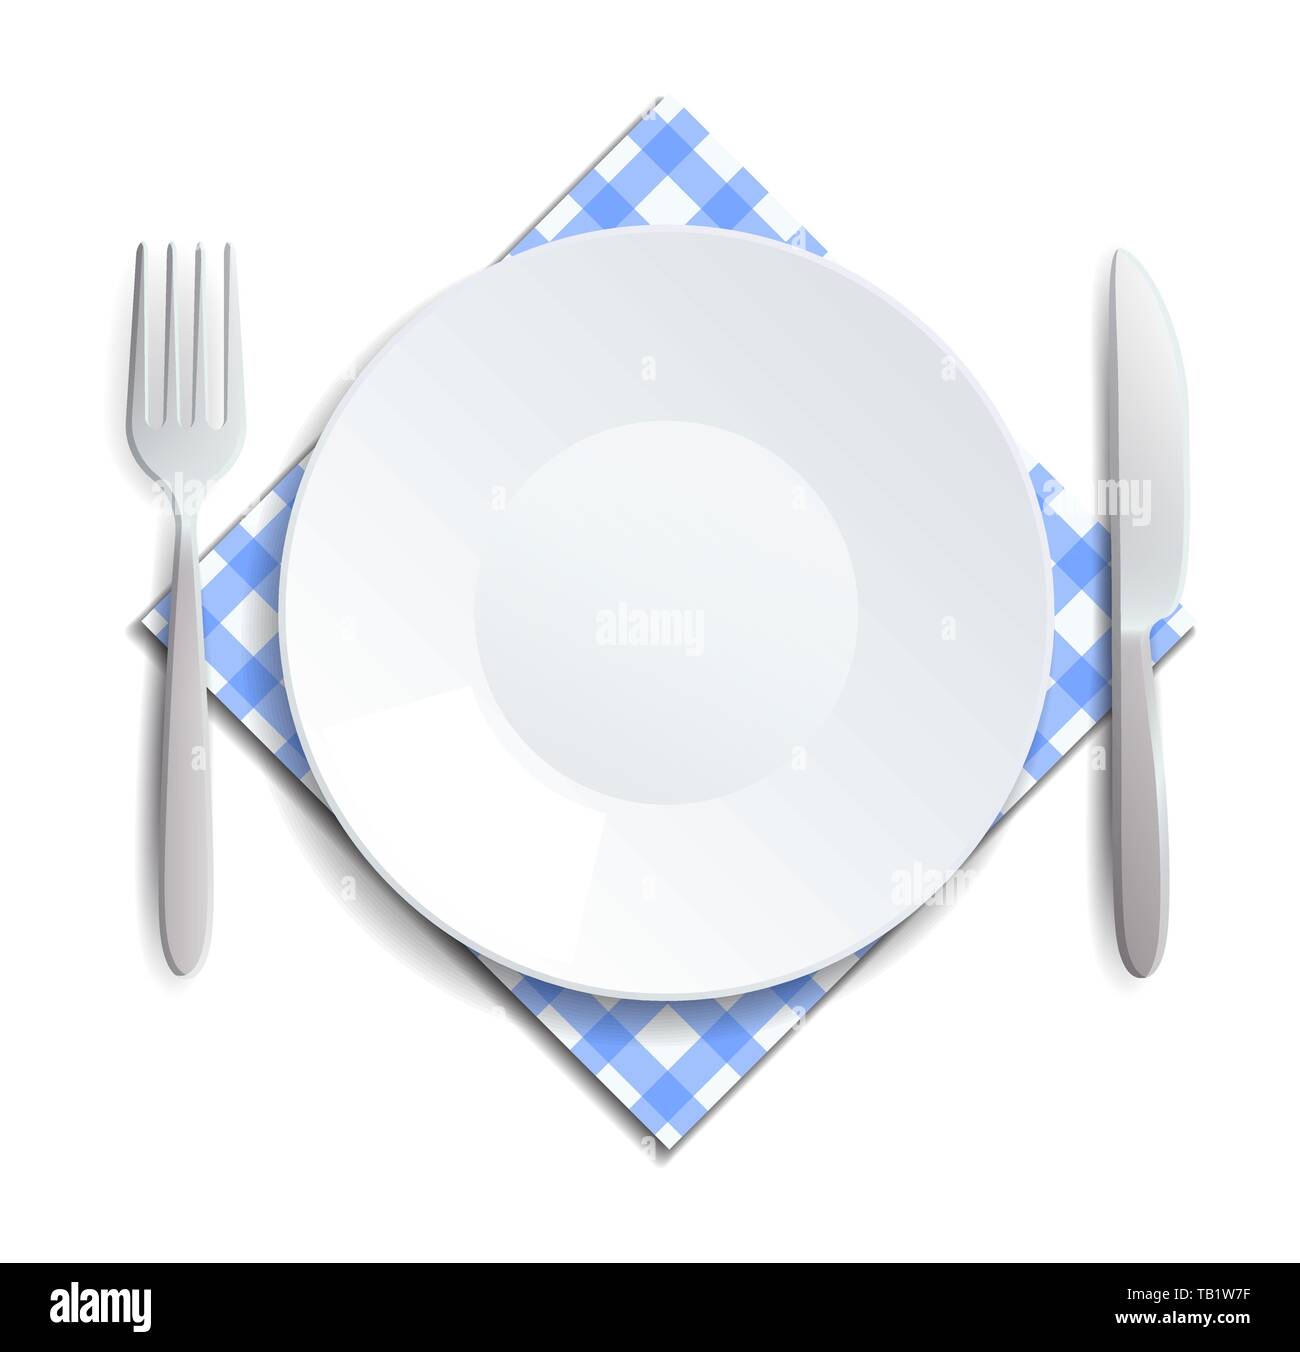 Realistic empty plate, fork and knife served on a checkered napkin vector illustration. Can be used for advertising Stock Vector